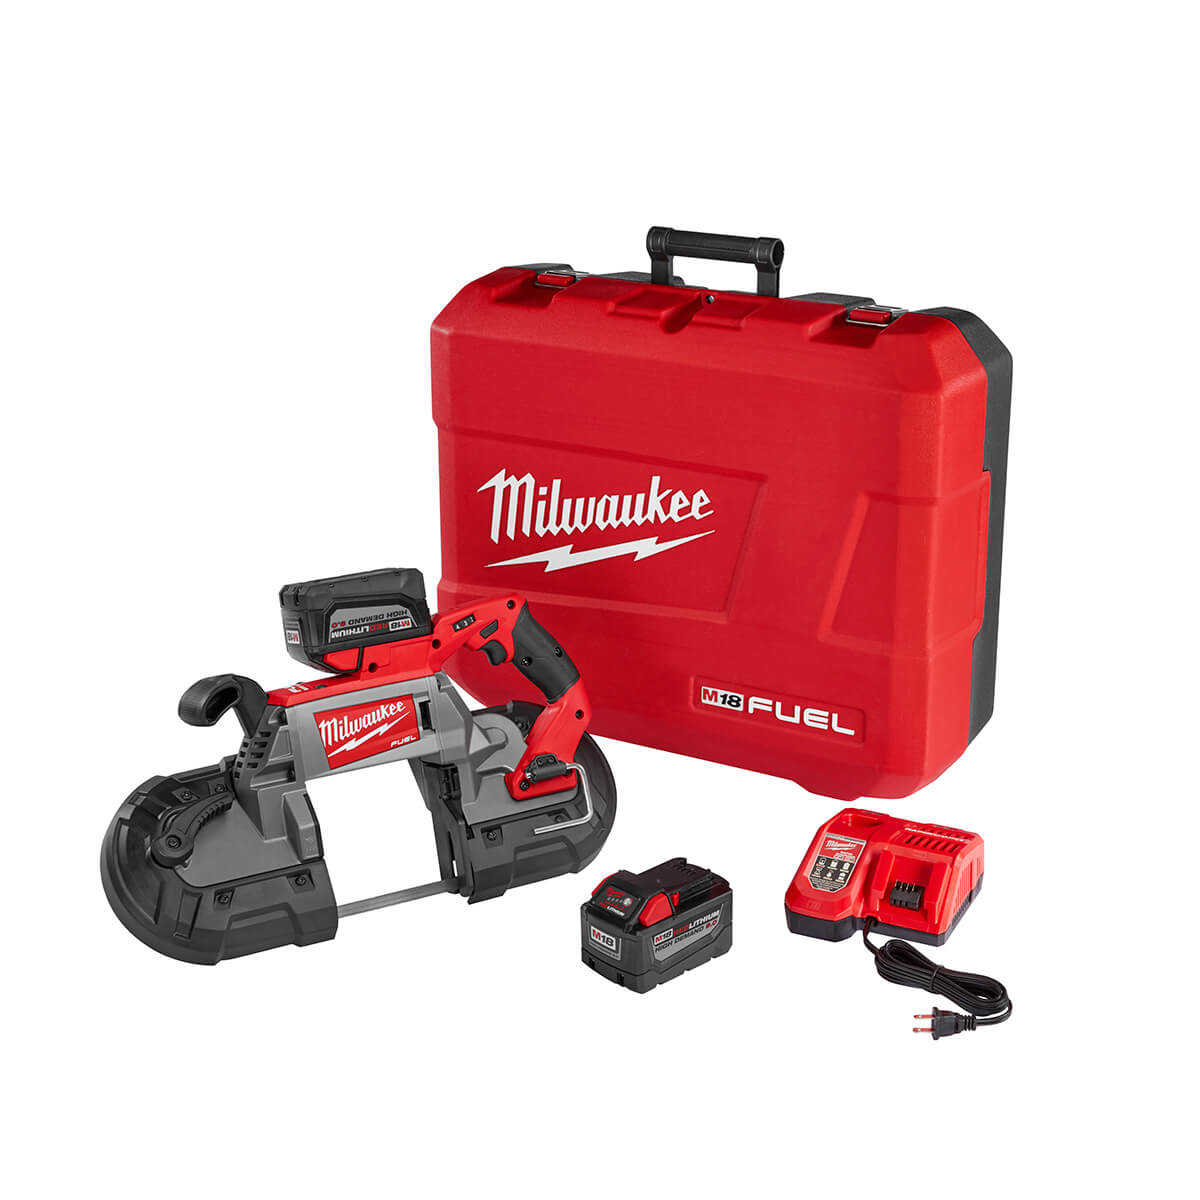 Milwaukee 2729-20 M18 Fuel Deep Cut Band Saw Tool Only - 2